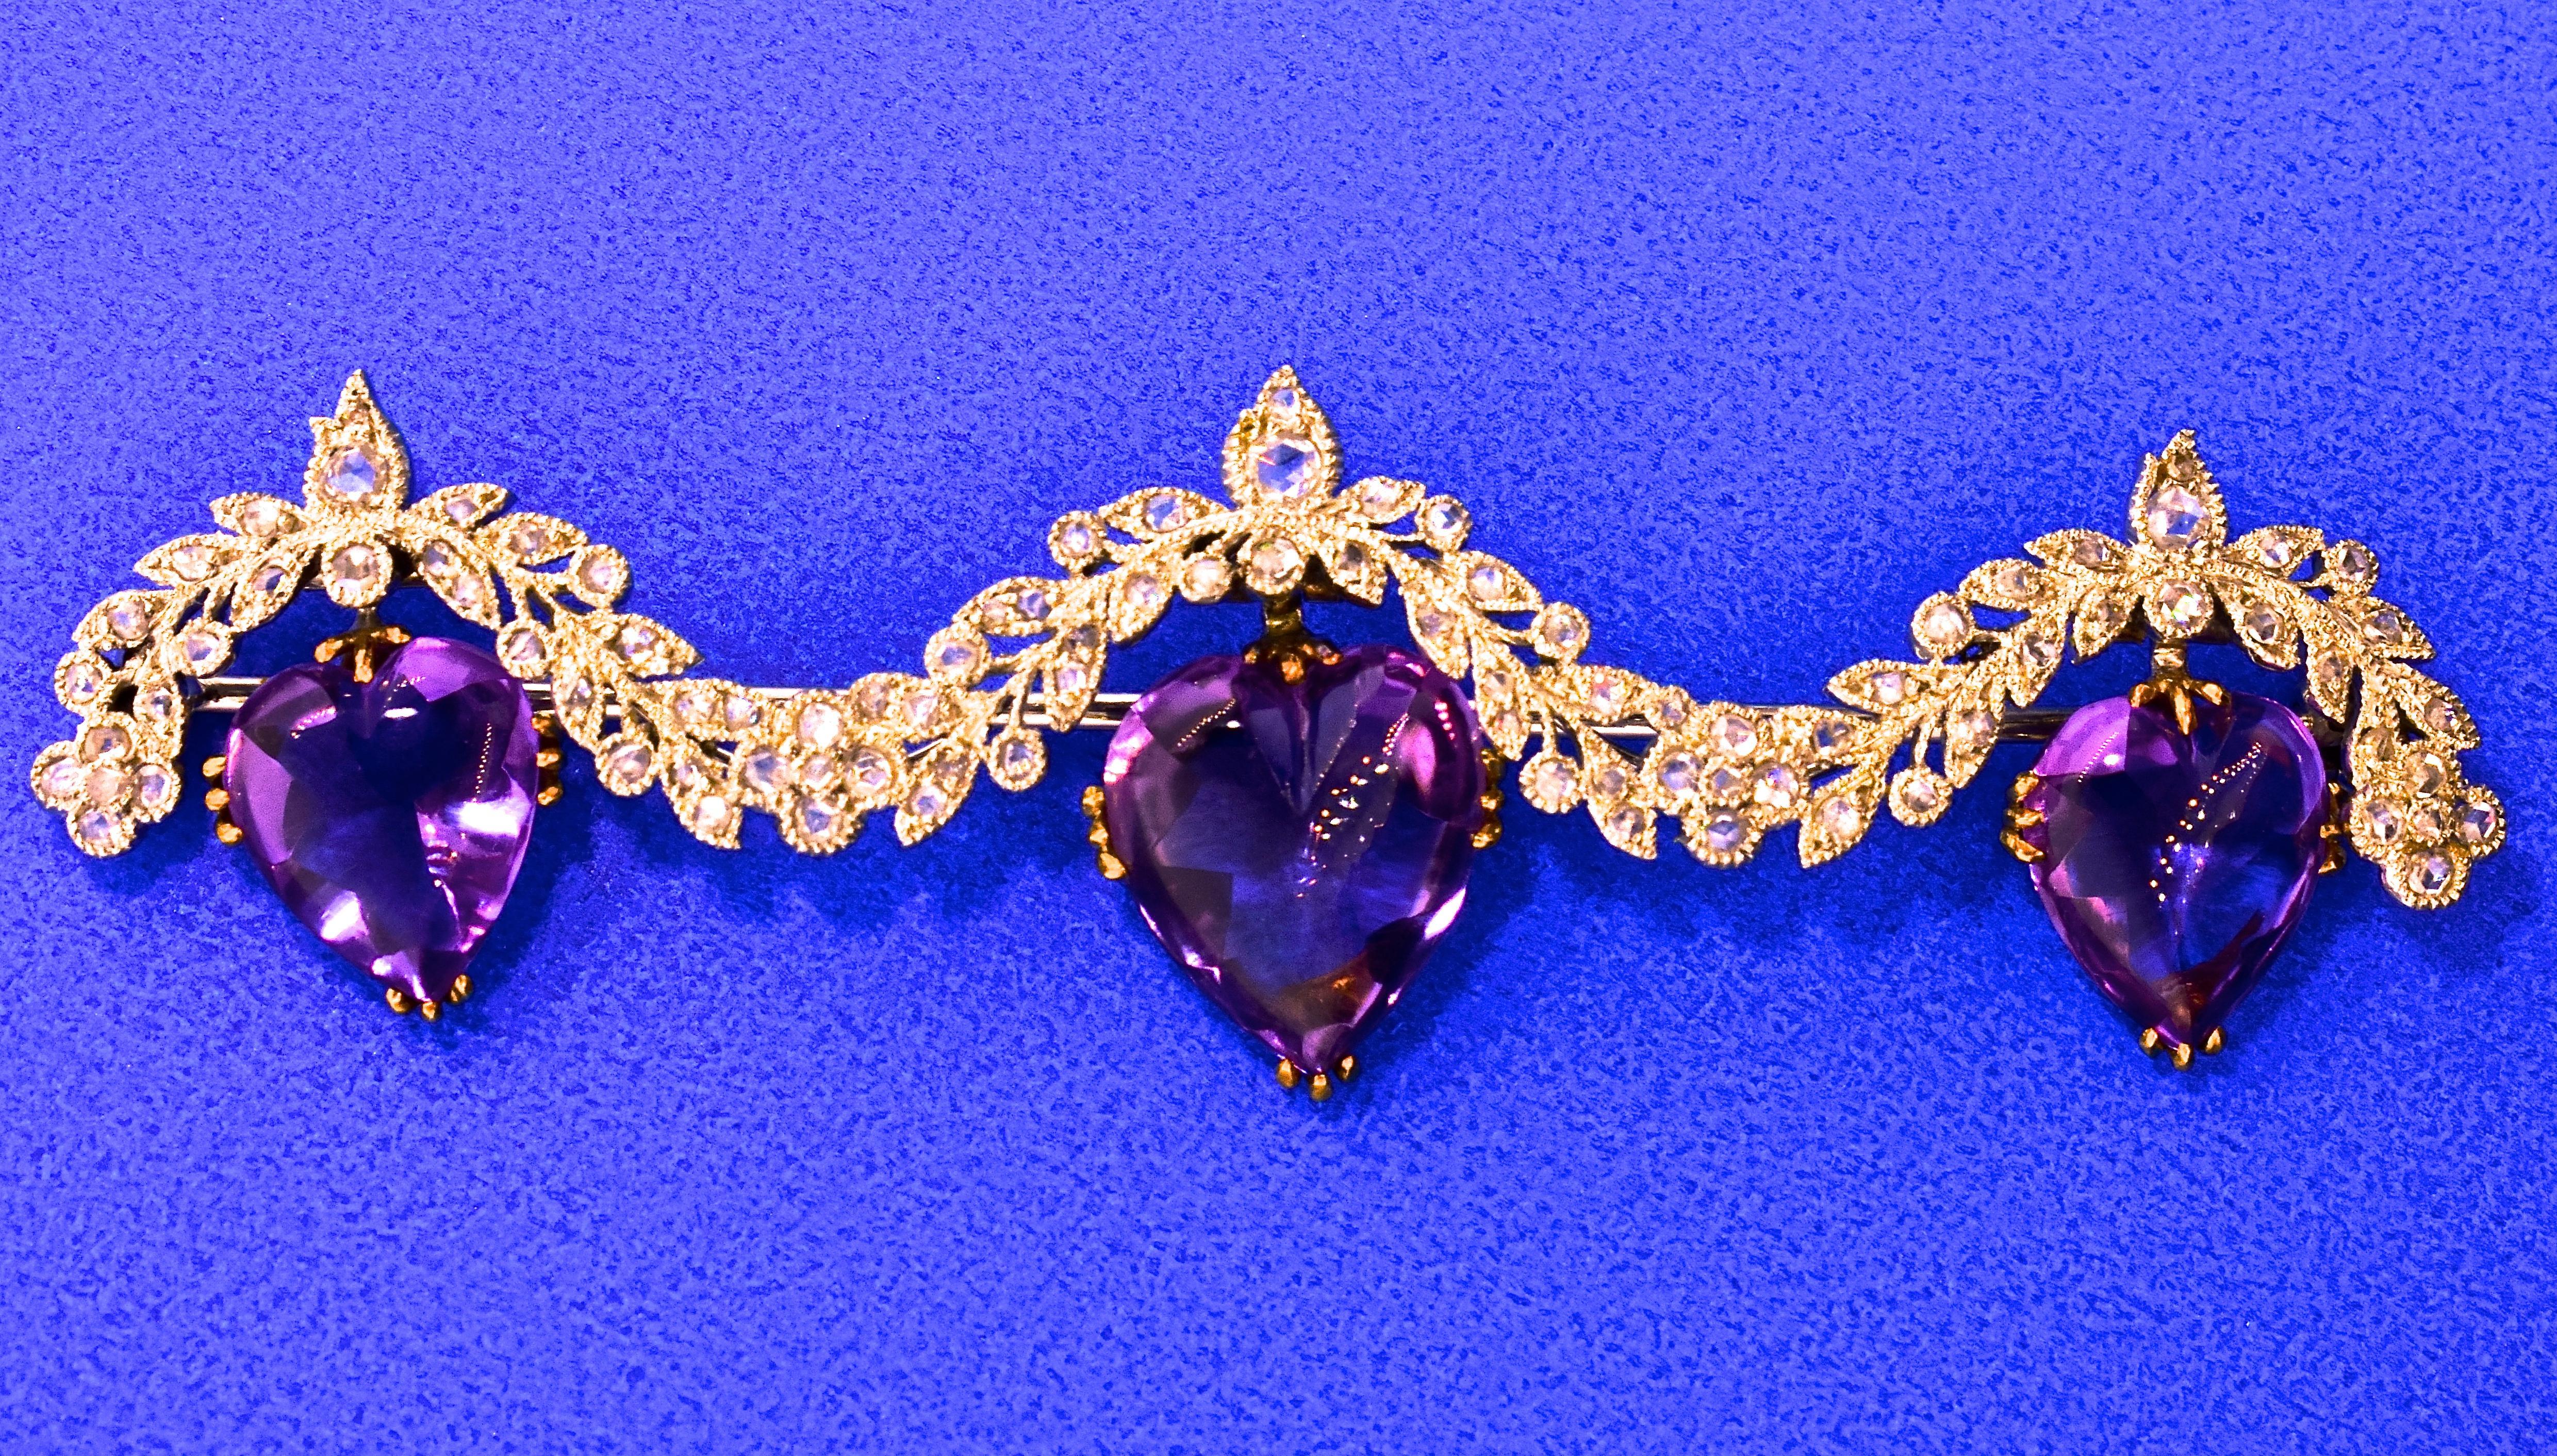 Antique Heart shaped Amethyst Brooch with Diamond, Edwardian, circa 1910 In Excellent Condition For Sale In Aspen, CO